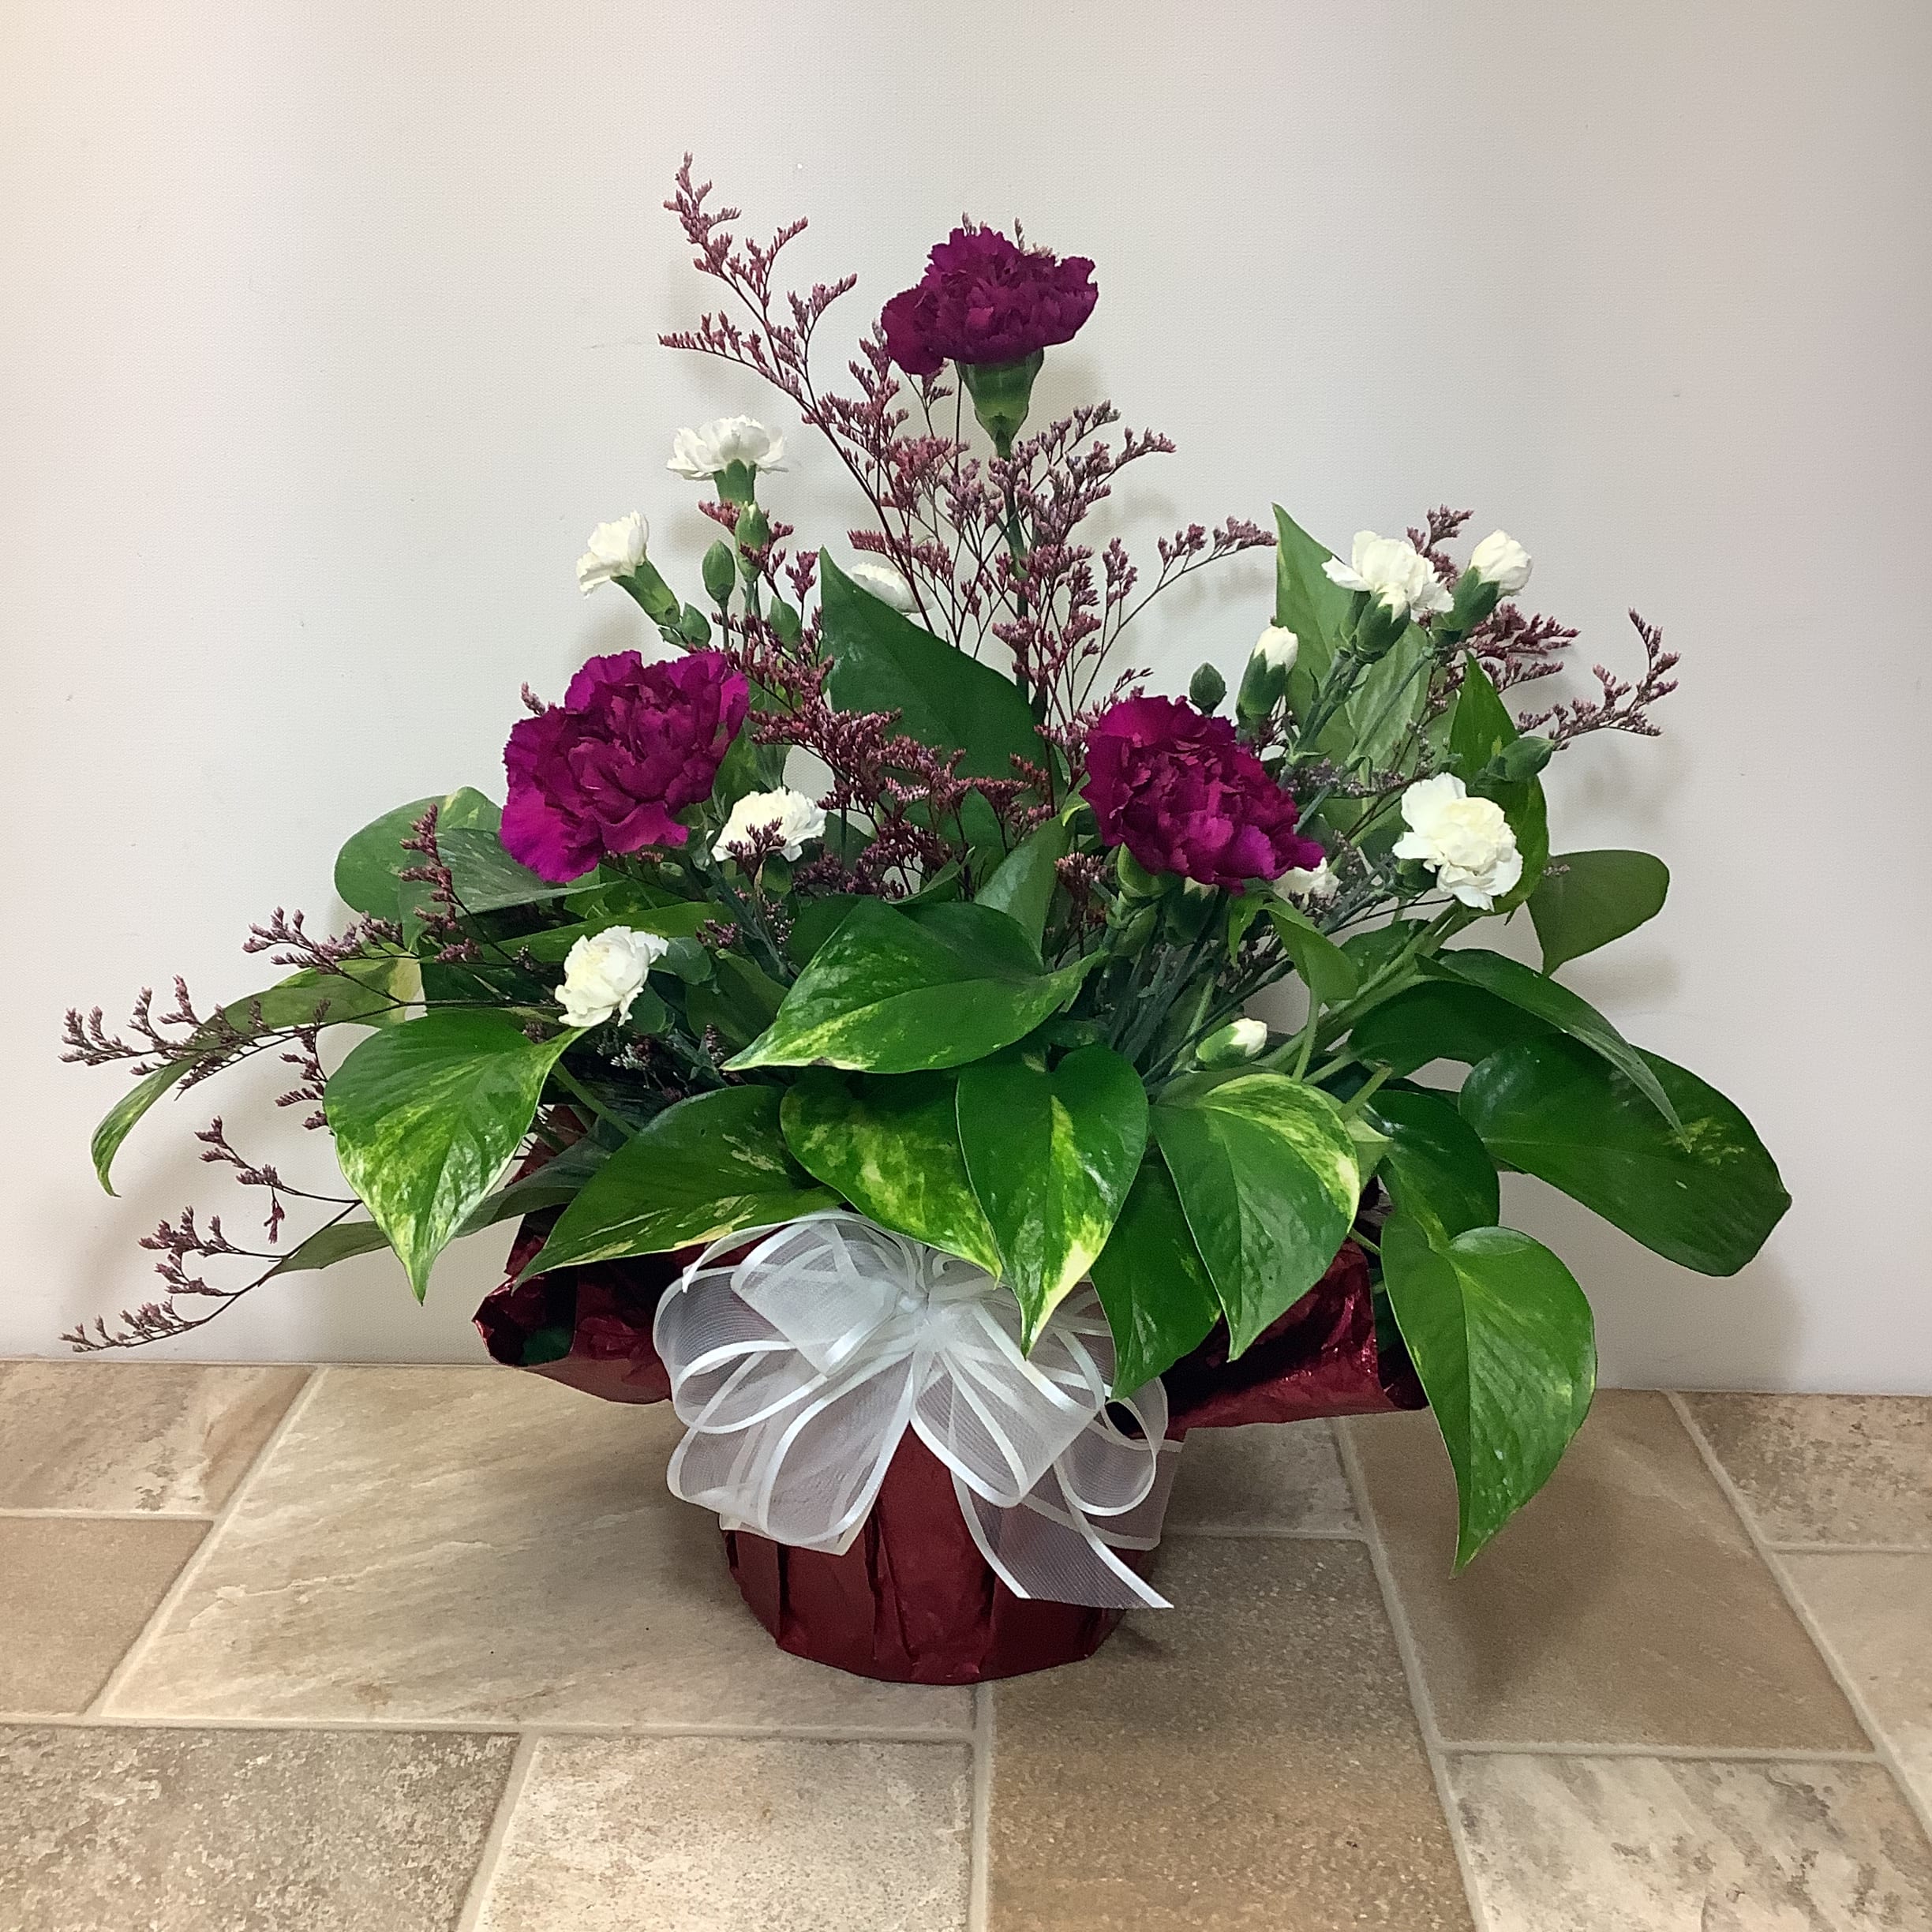 Pothos Plant with Carnations - Wine colored carnations, burgundy limon and white mini carnations perfectly enhance this hardy pothos plant. It’s super easy to grow too!